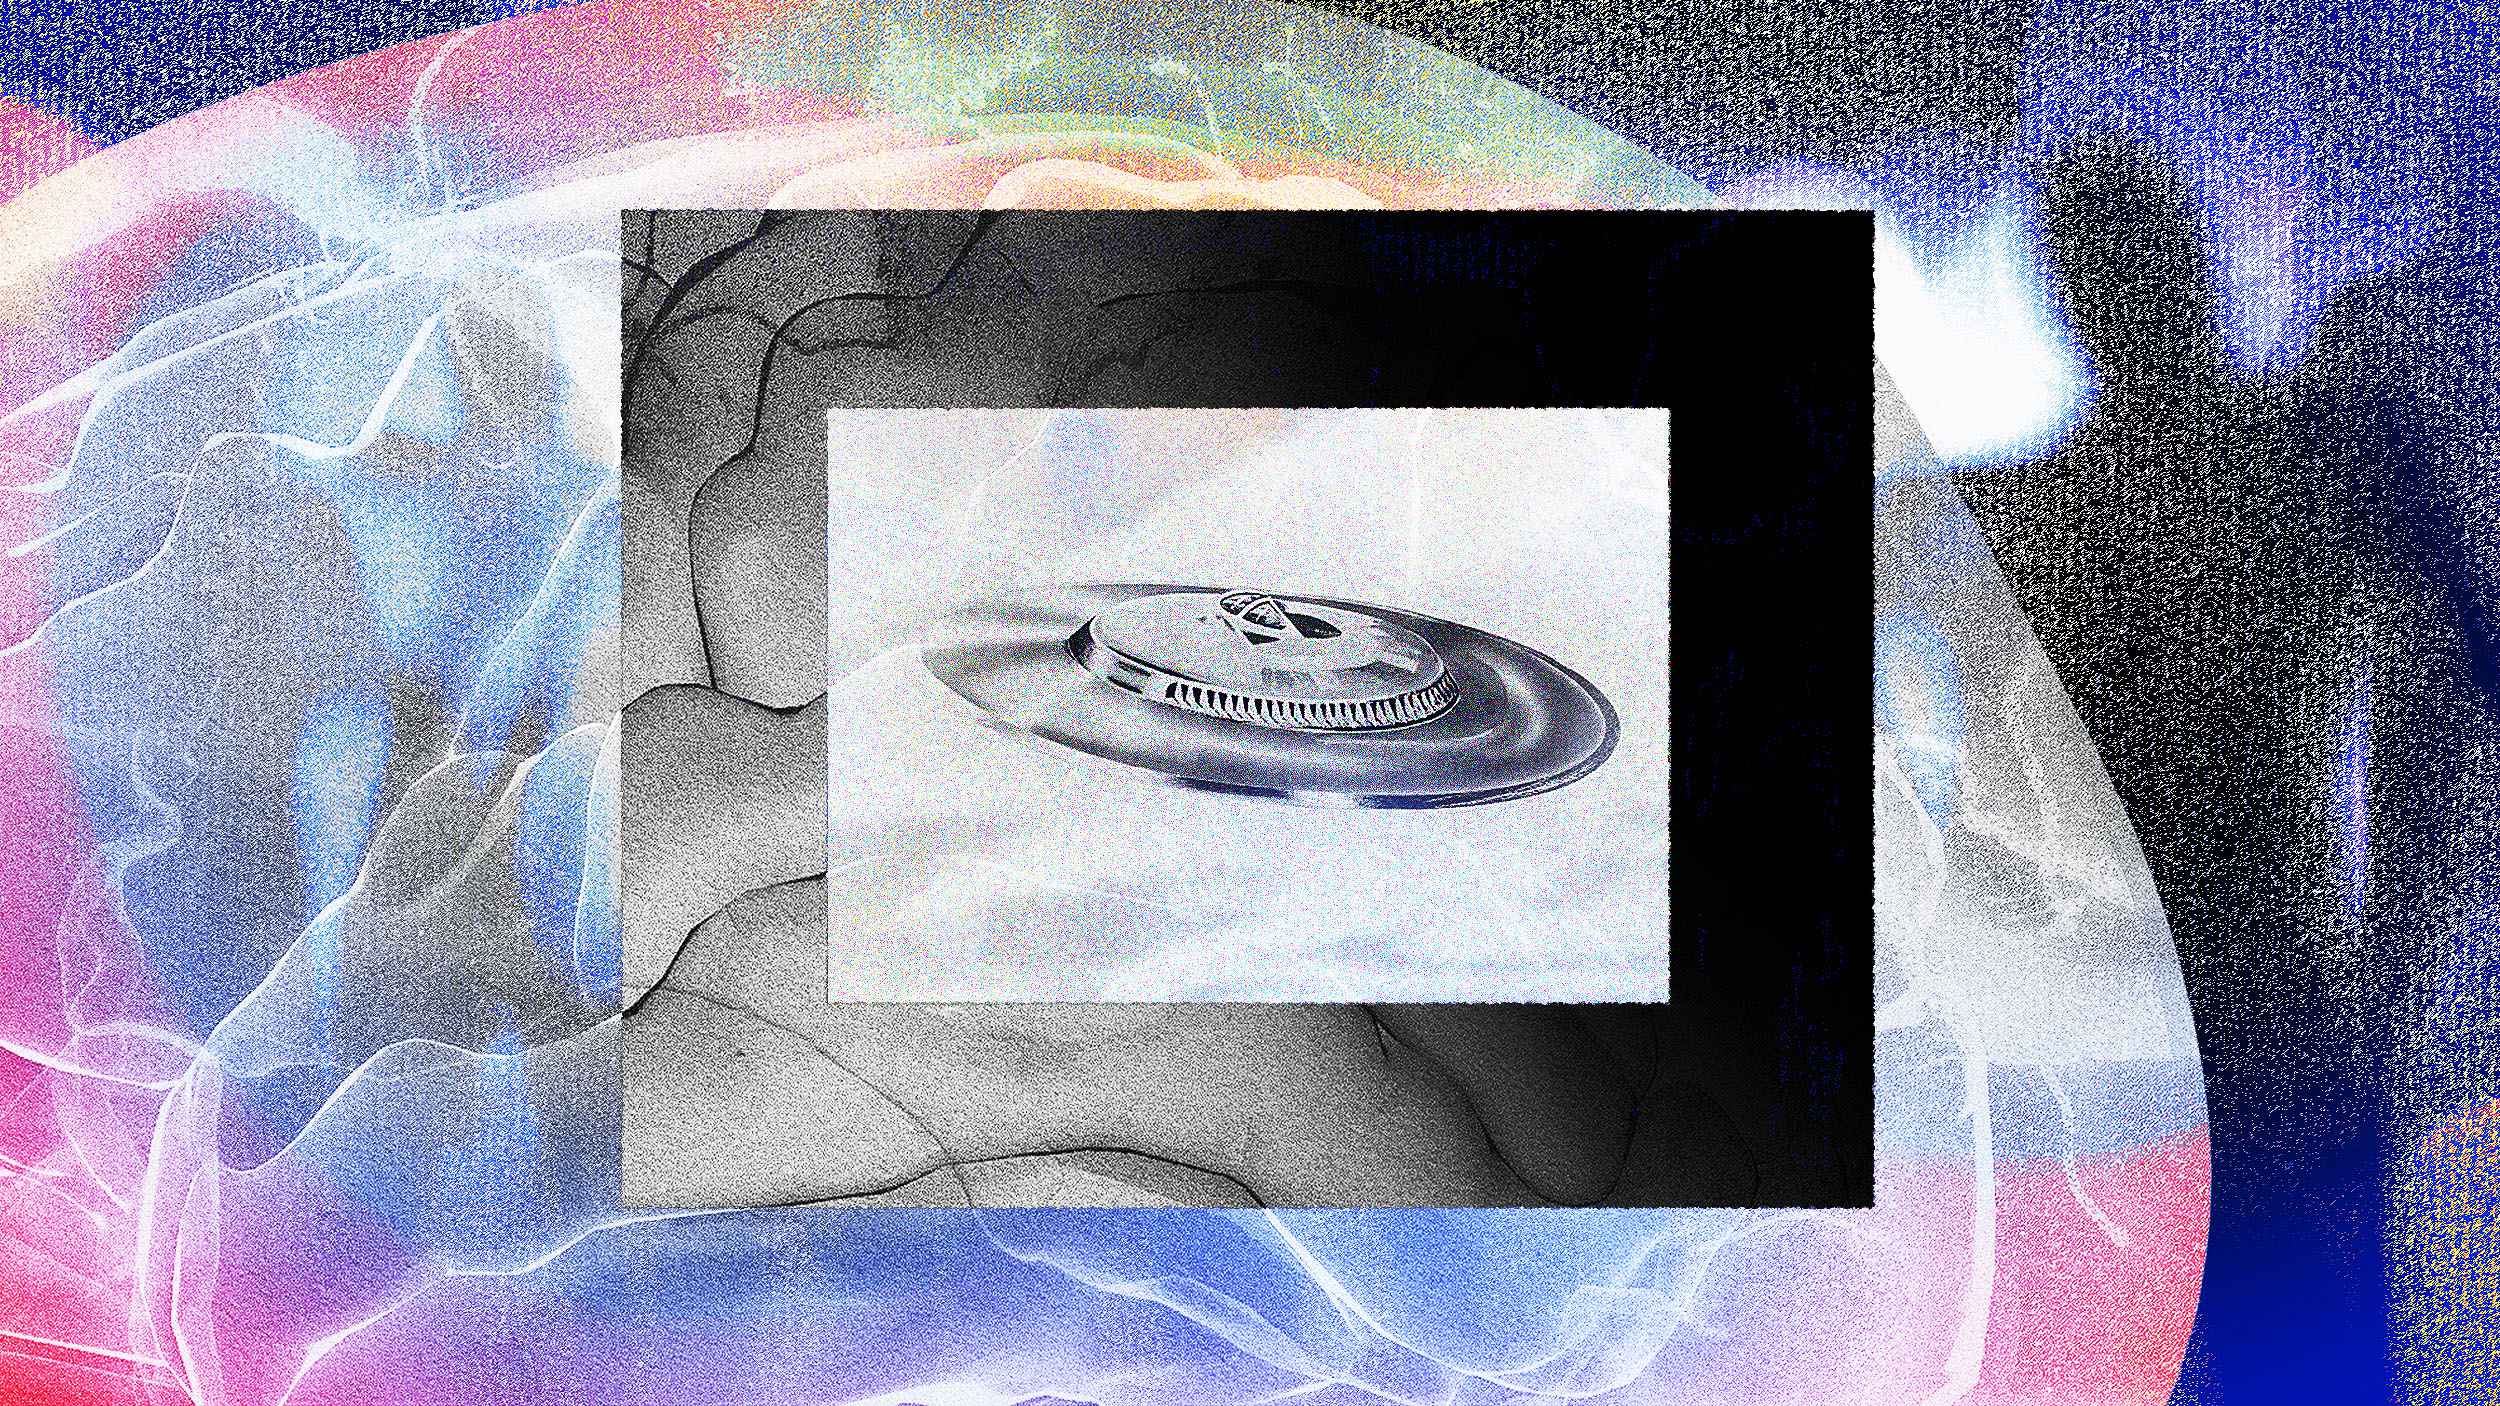 An abstract digital collage inspired by alien abduction stories, with a monochrome vinyl record at the center surrounded by colorful, glitch-like textures and shapes.